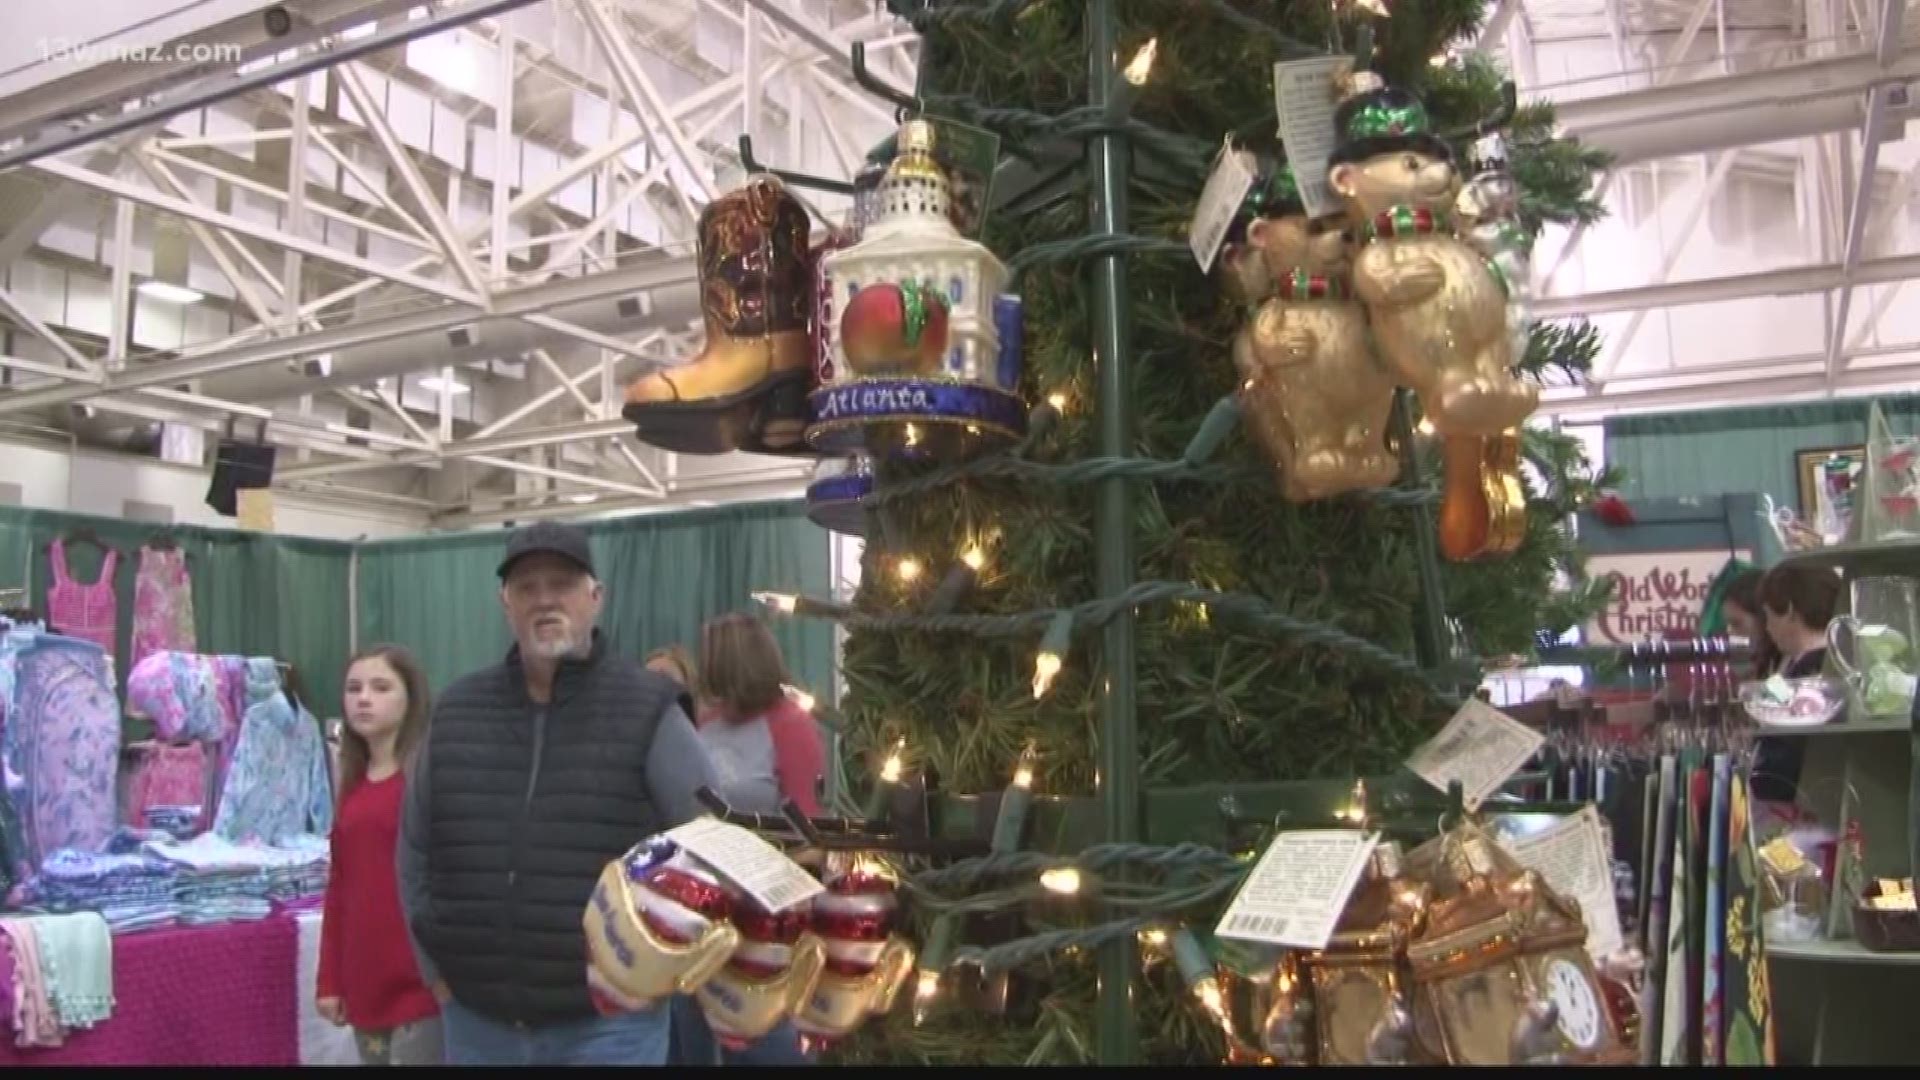 The Georgia National Fairgrounds turned into a shopper's winter wonderland this weekend. Hundreds of people came to pick up the perfect Christmas gifts.